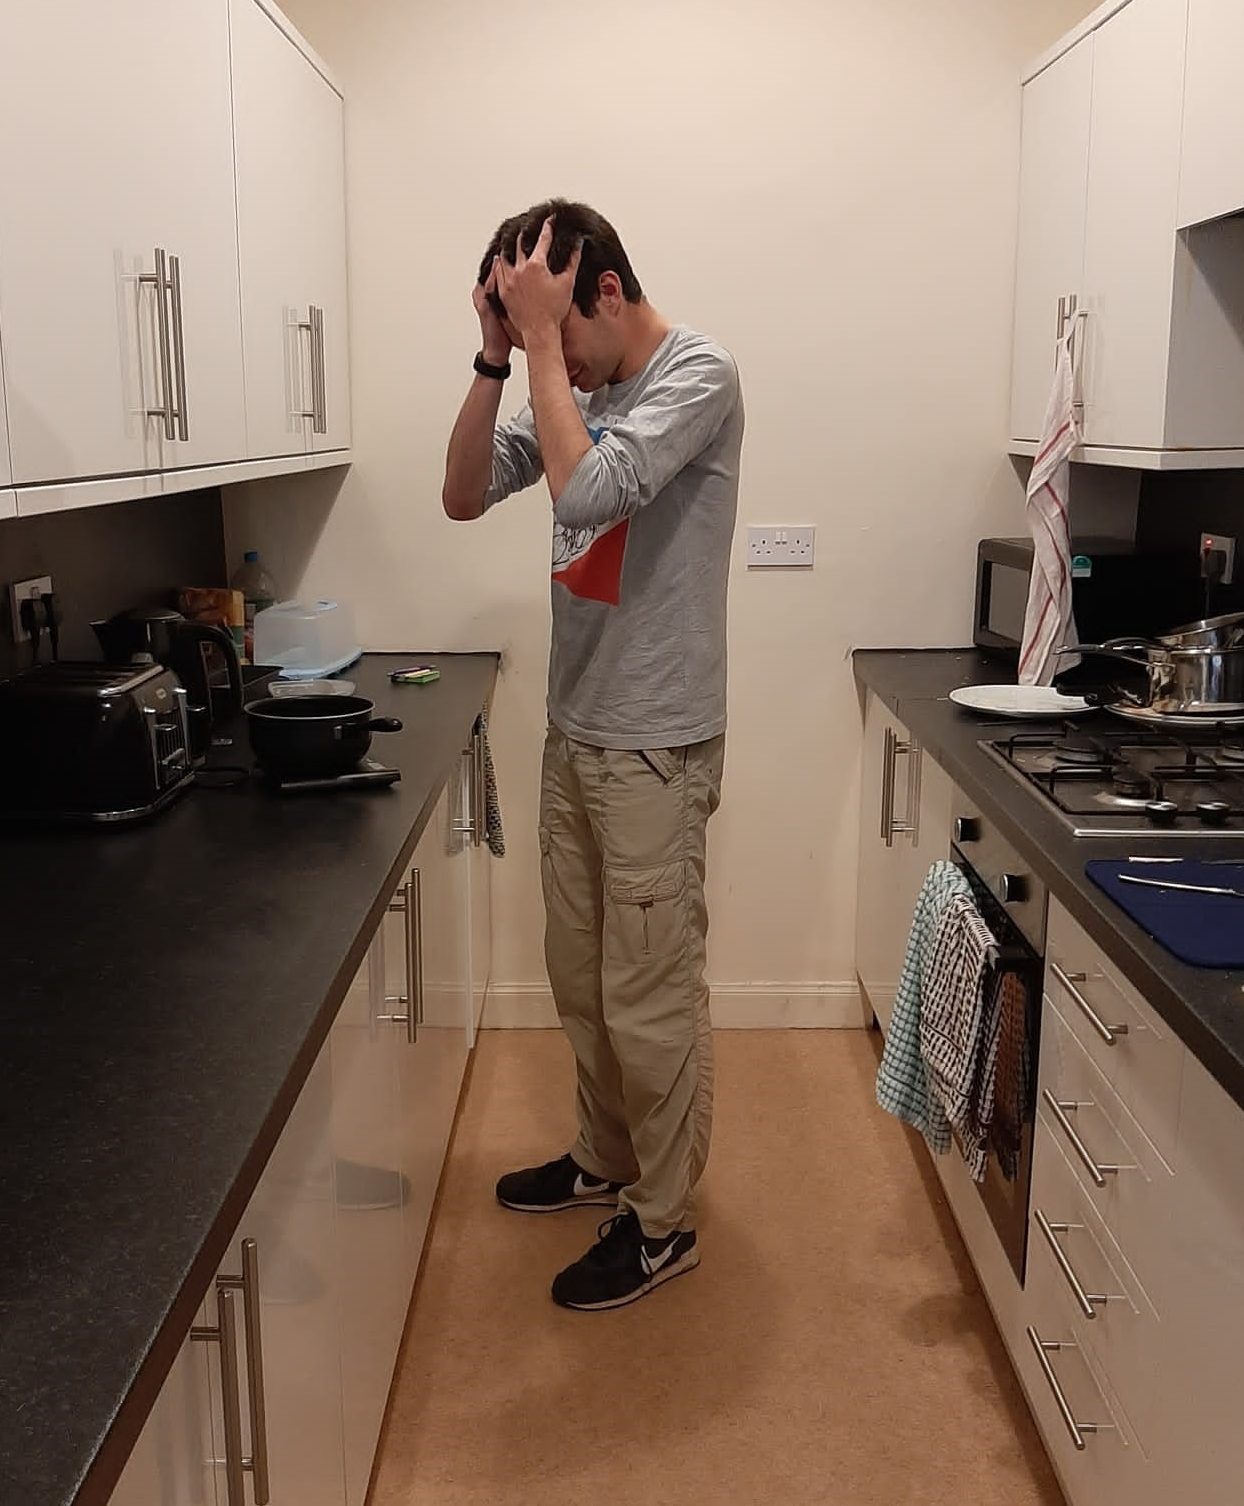 A man stands over a saucepan in a kitchen, his head in his hands.